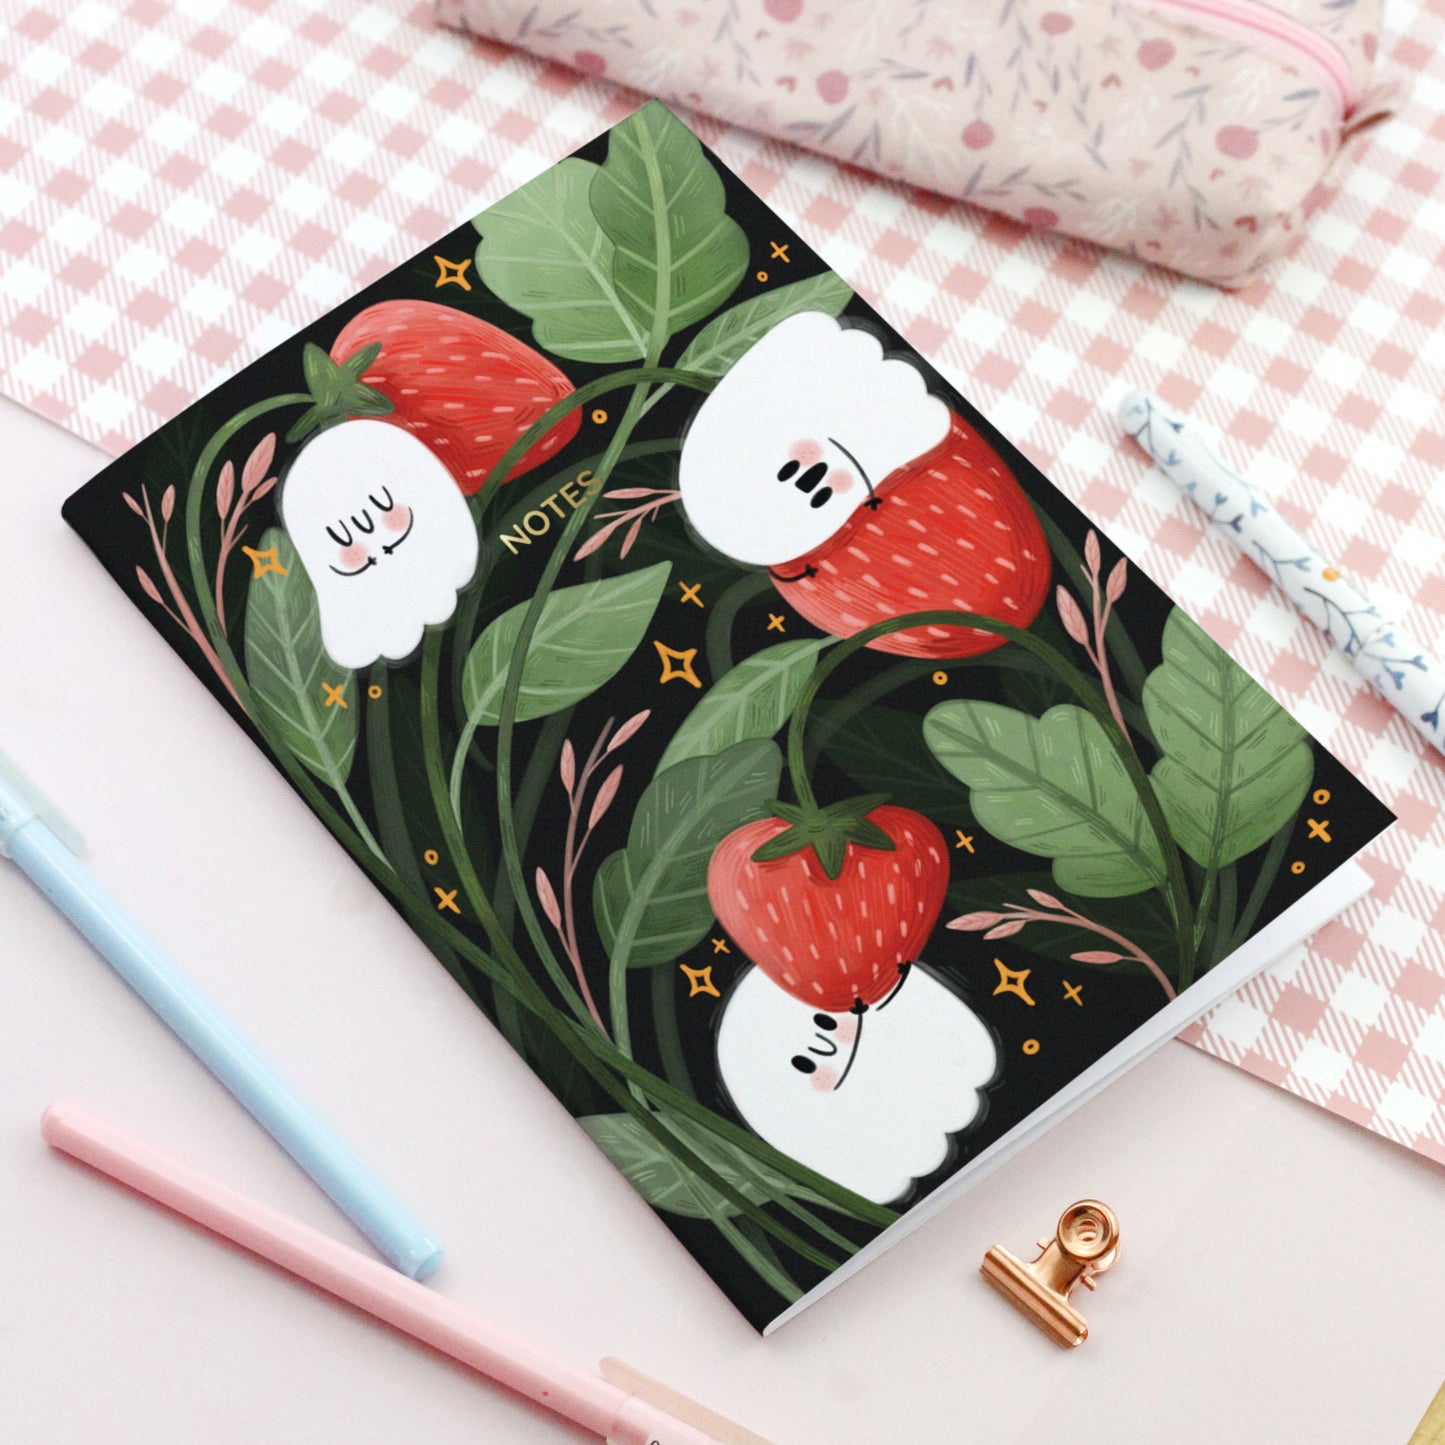 Ghosty & Strawberries soft notebook - Summer Stationery gift